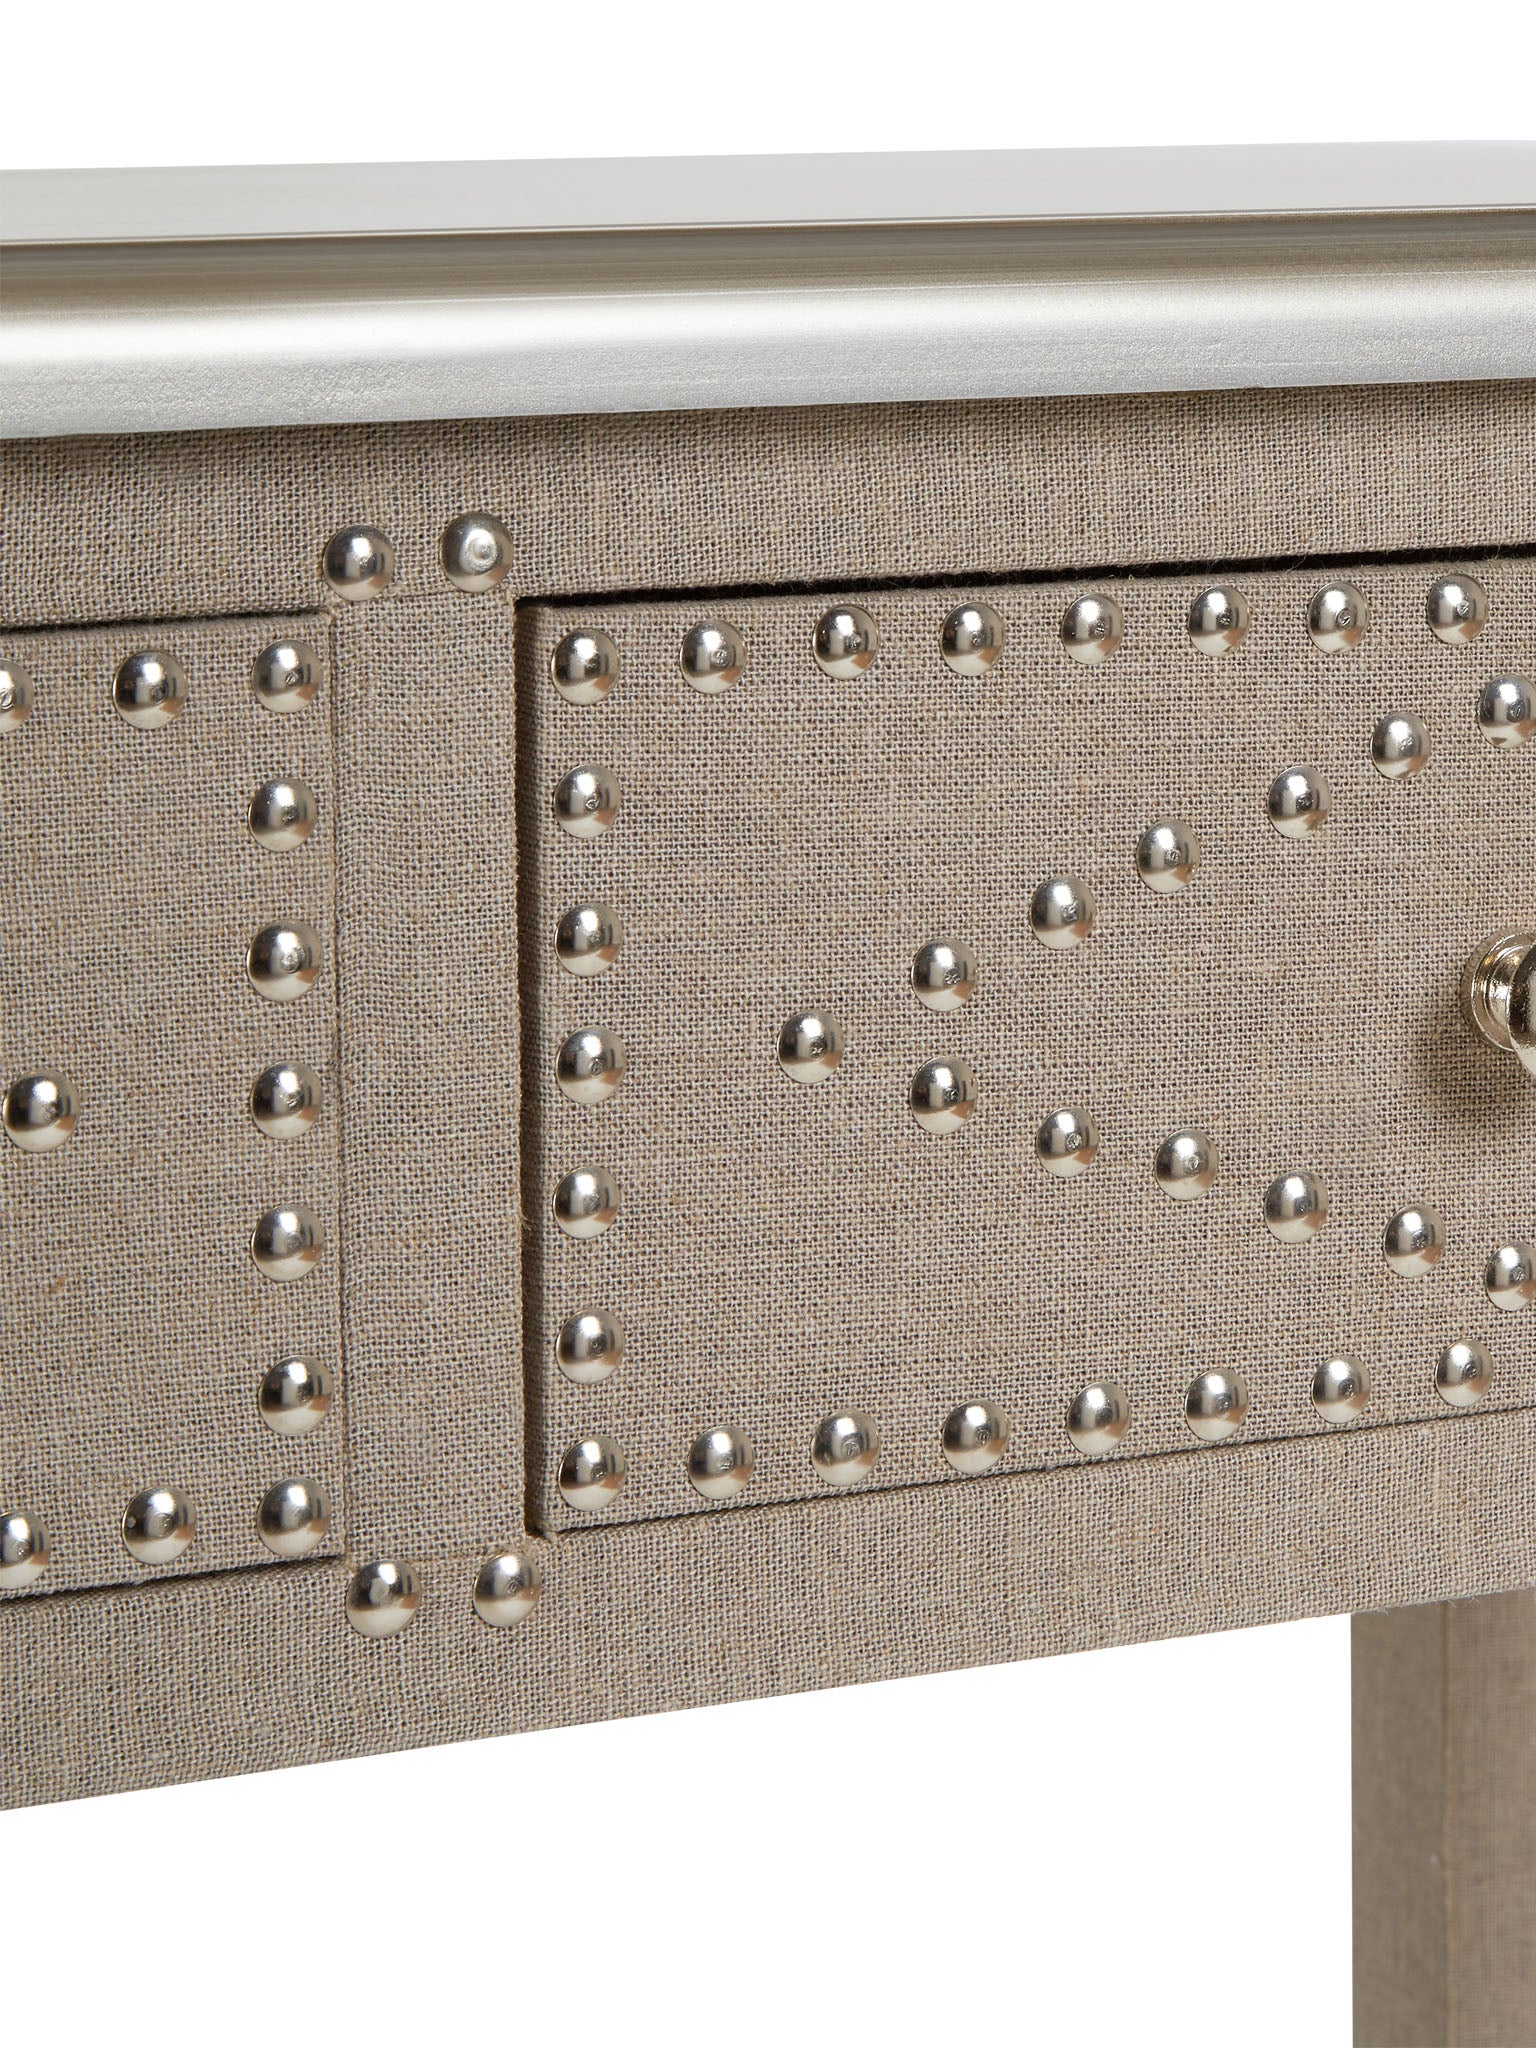 Three Drawer Console Table with stud detail